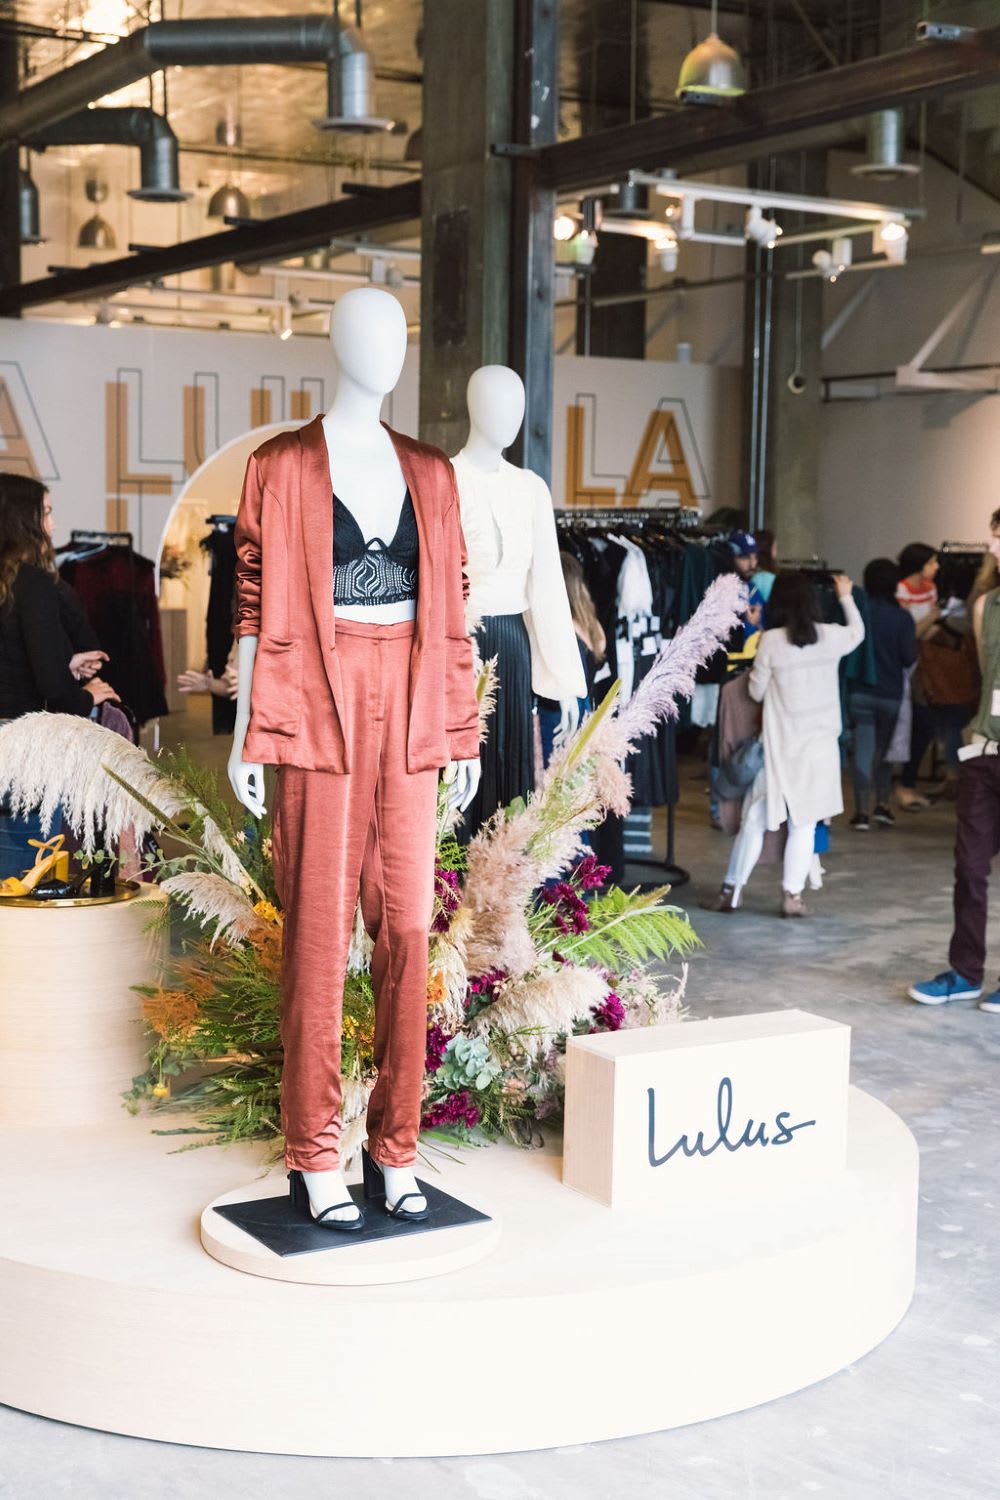 Go Behind-the-Scenes at the Lulus Pop Up Shop in L.A.! - Lulus.com Fashion  Blog